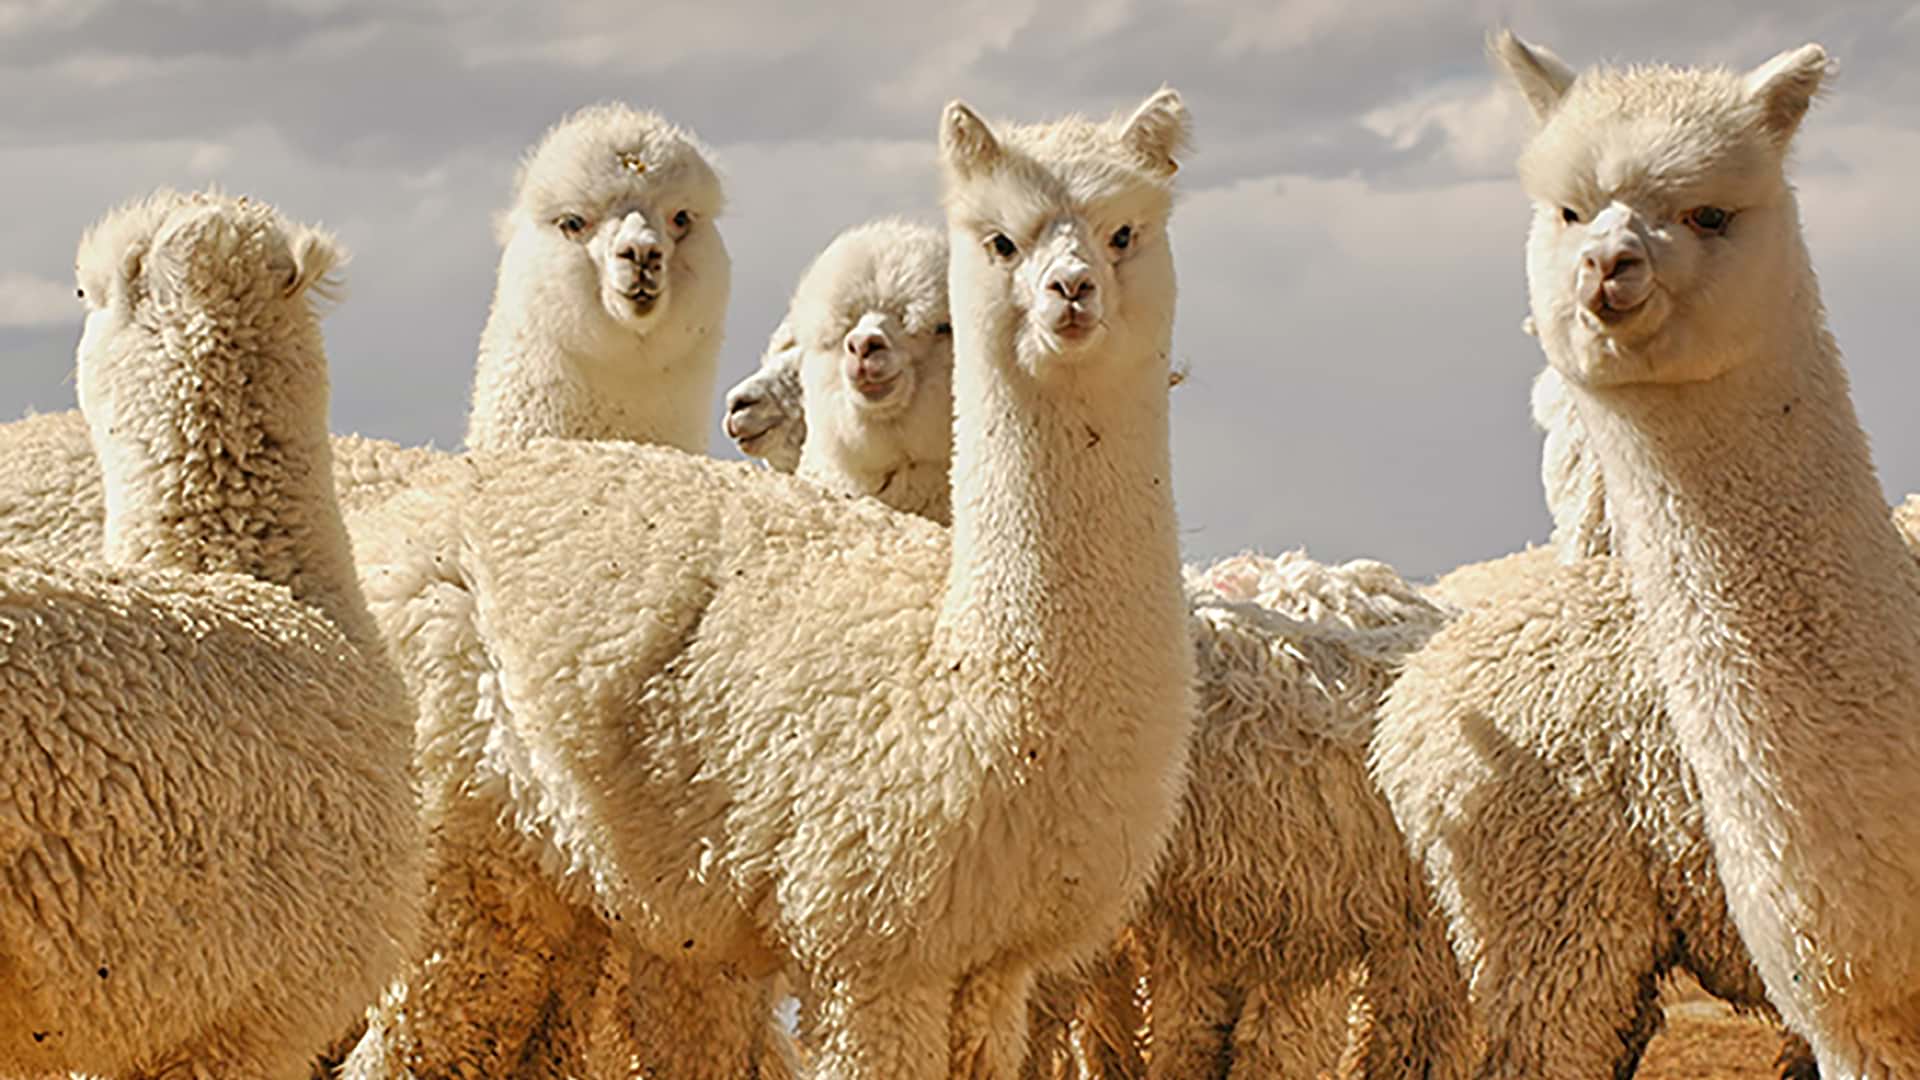 11Meet Alpacas from up close with RESPONSible Travel Peru